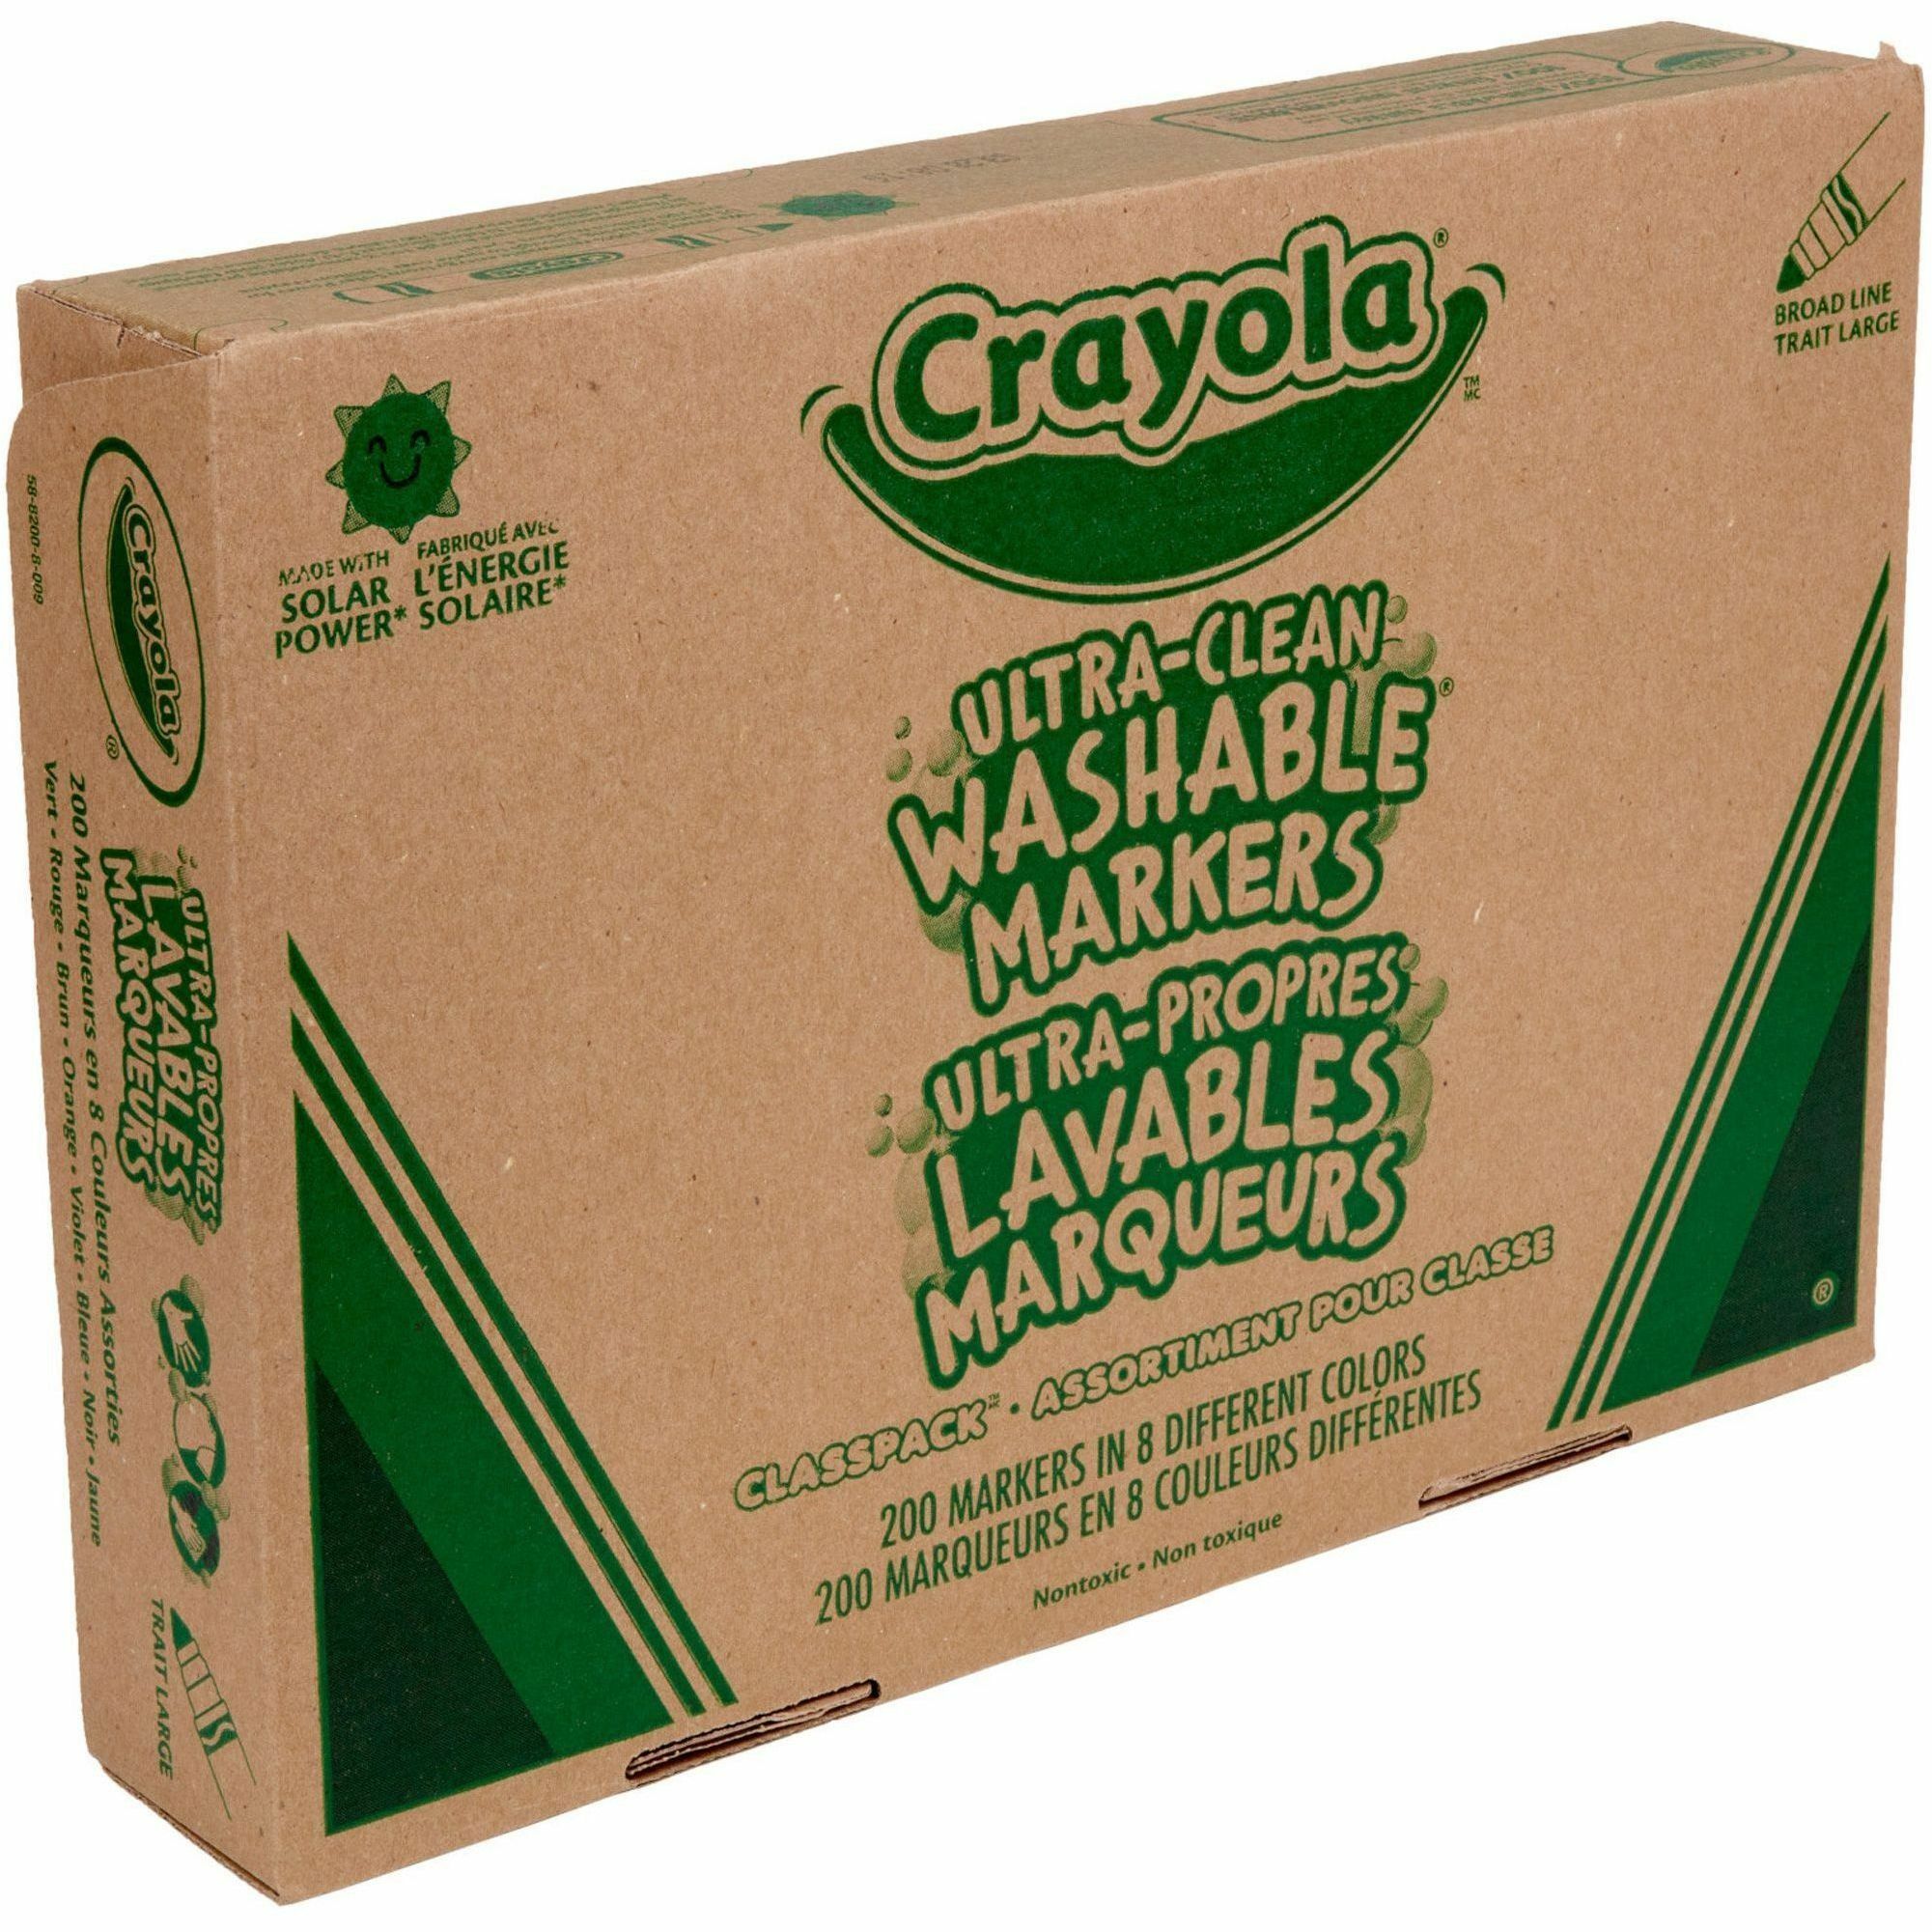 Crayola 8-Color Ultra-Clean Washable Marker Classpack